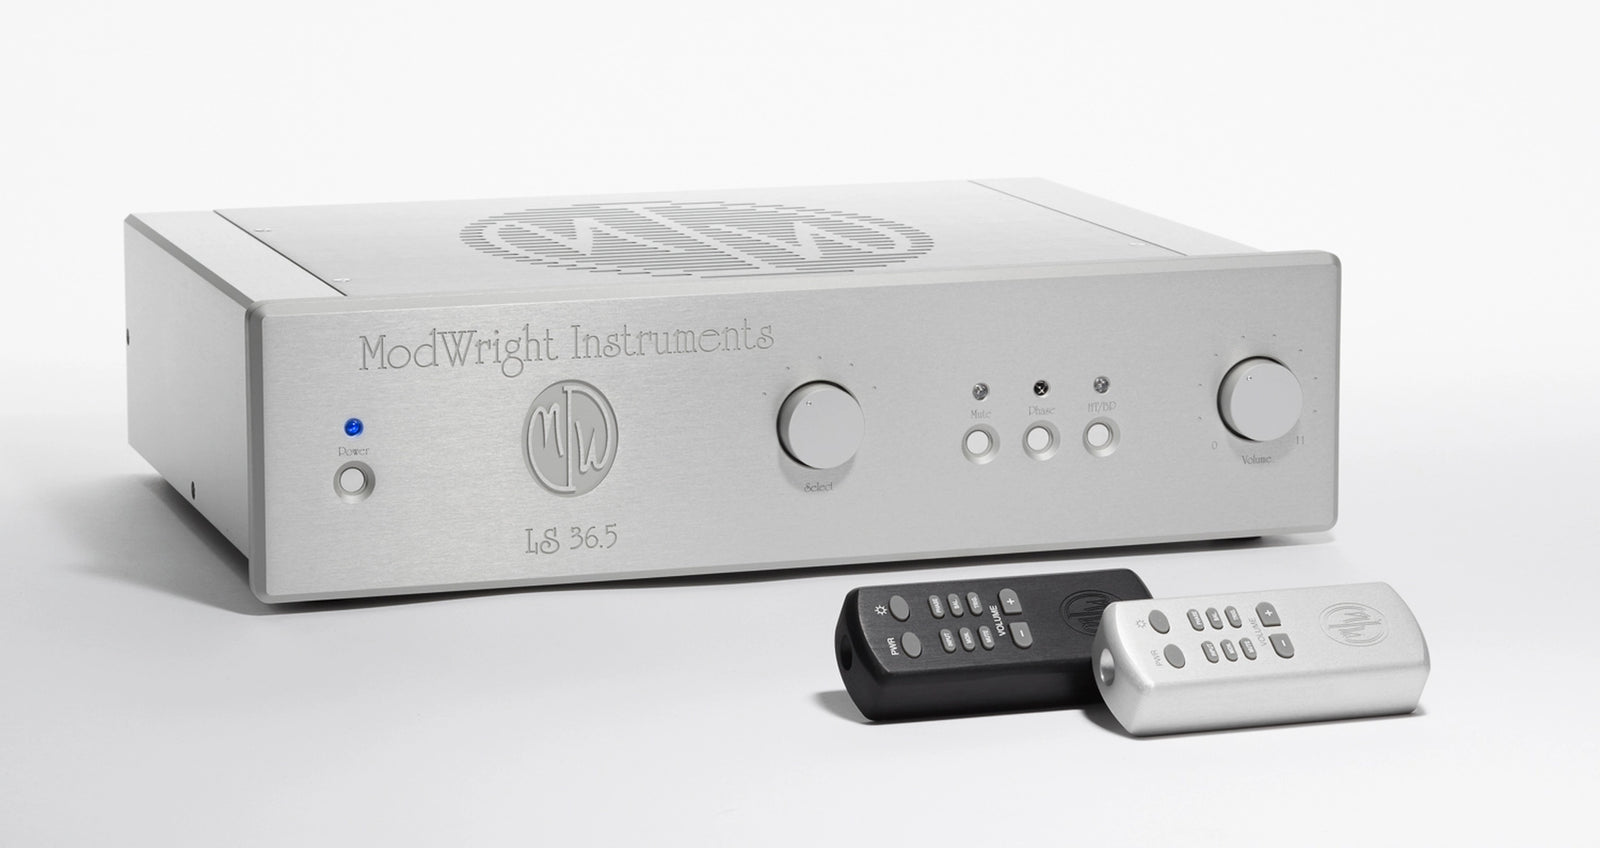 ModWright is a company producing modifications to digital products such as  tube amplifiers, phono stages, headphone amplifiers, amplifiers, integrated amplifier, preamplifier.